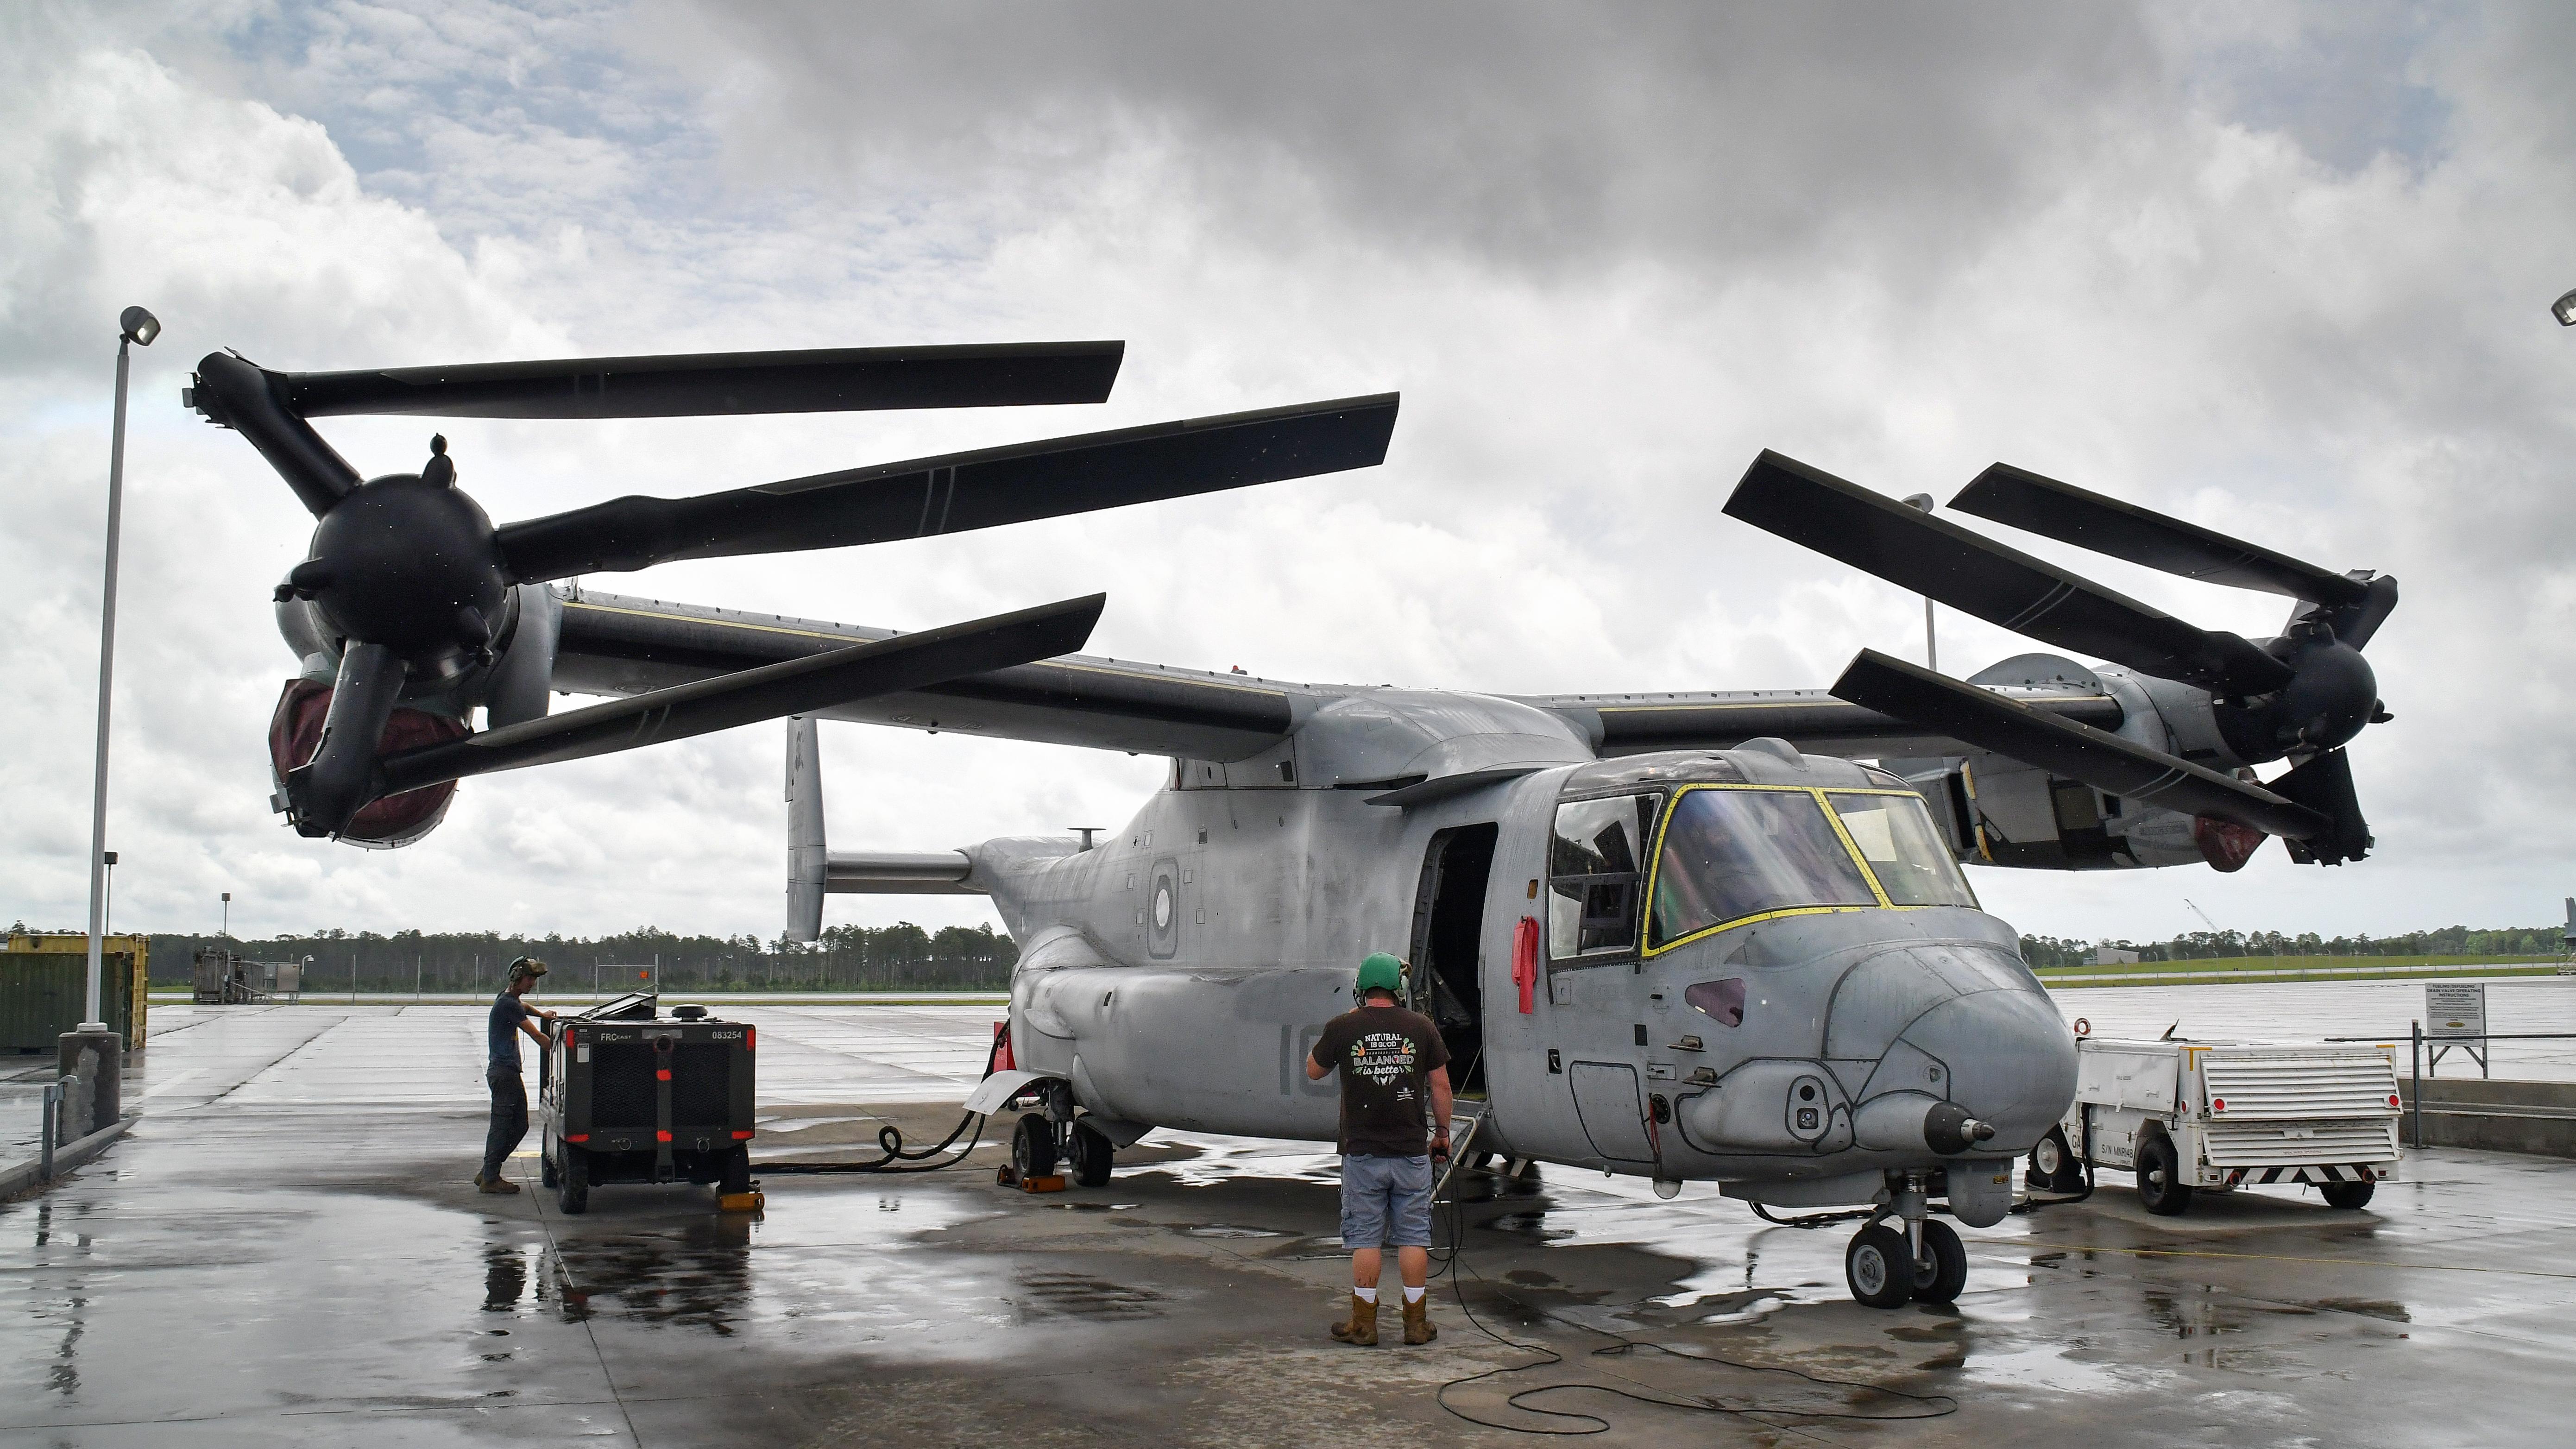 Fleet Readiness Center East (FRCE) artisans ready an MV-22 Osprey for “ground turn” which is an essential operational test of all of the aircraft’s systems and components.